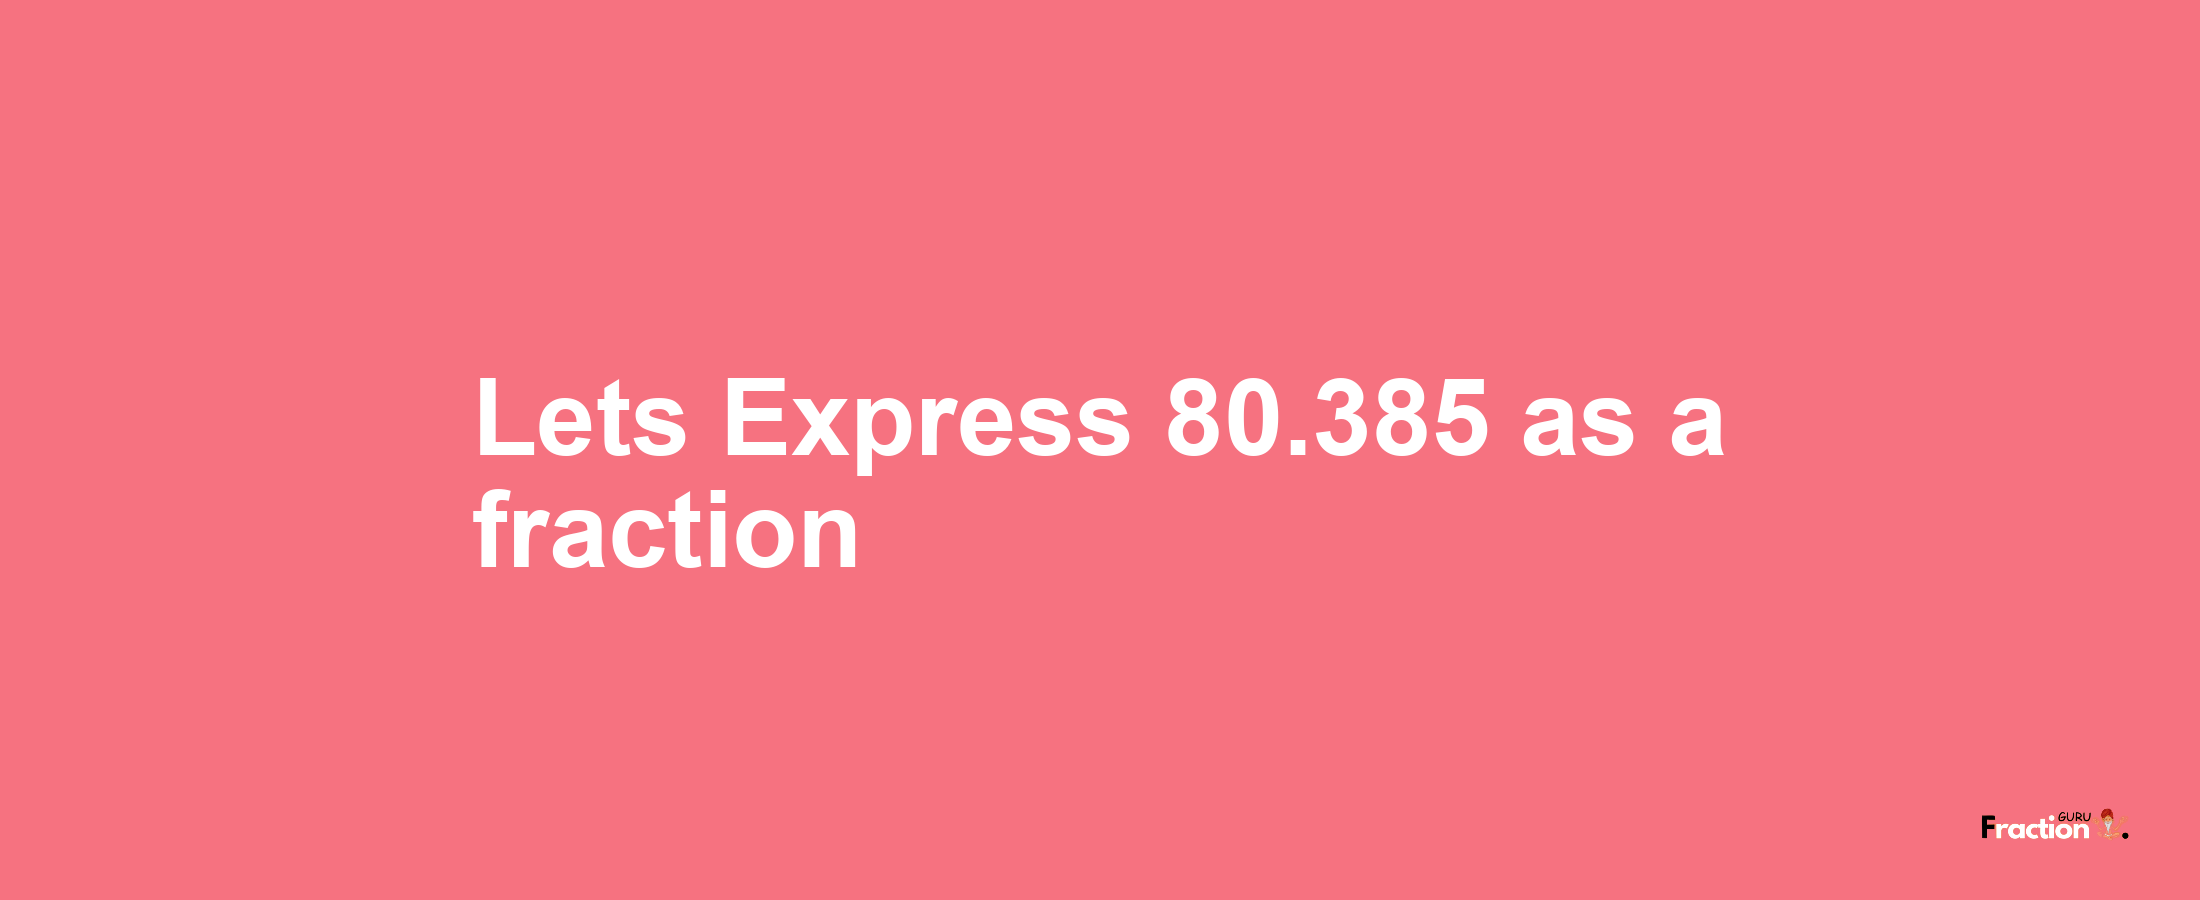 Lets Express 80.385 as afraction